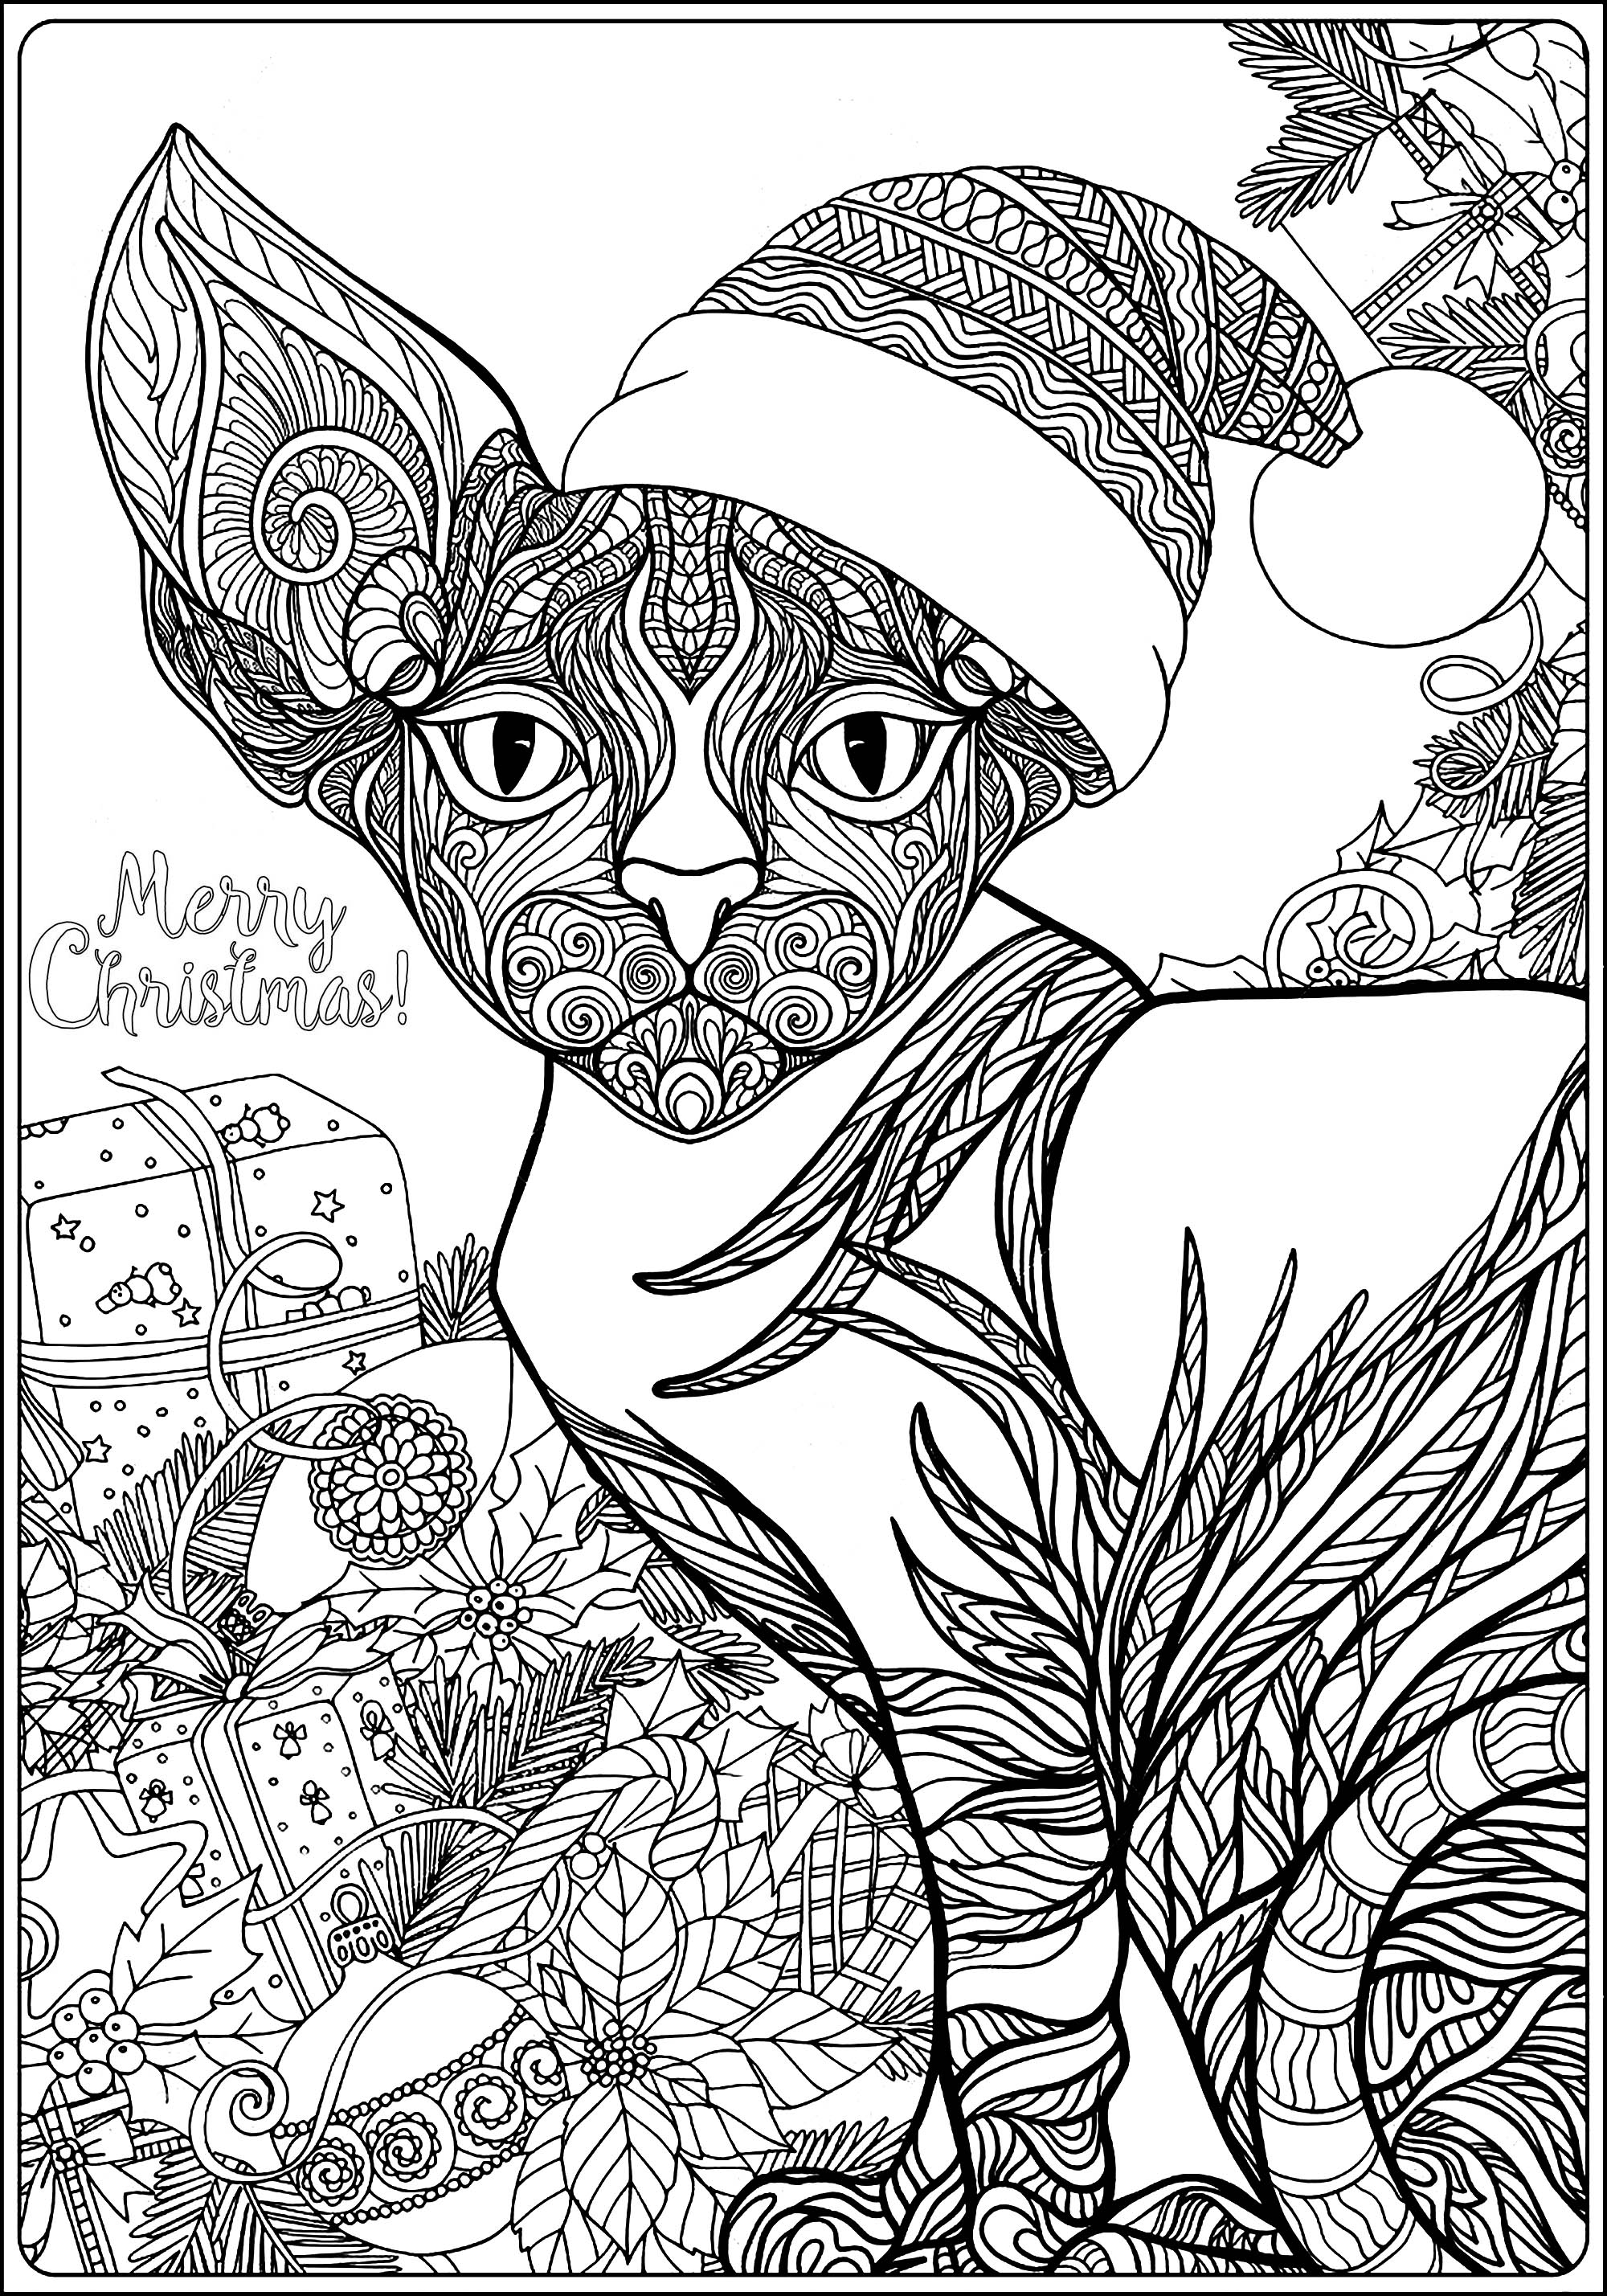 Christmas sphynx cat with gifts   Christmas Adult Coloring Pages